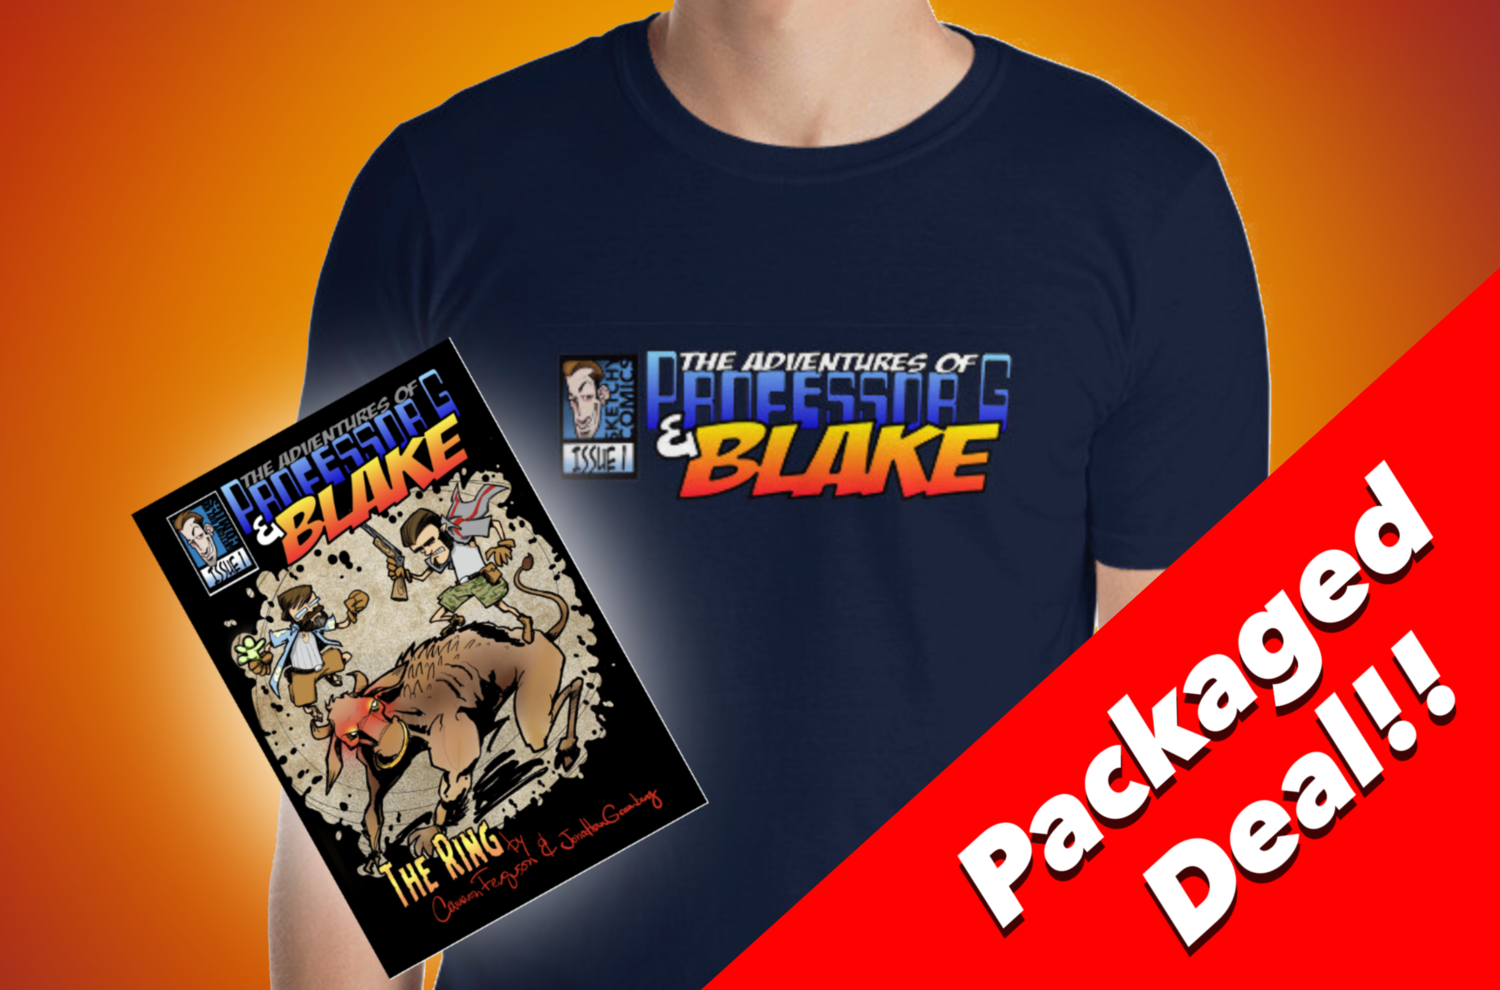 Limited Edition Professor G &amp; Blake Shirt and Signed Comic Deal - Short-Sleeve Unisex T-Shirt &amp; Signed Comic